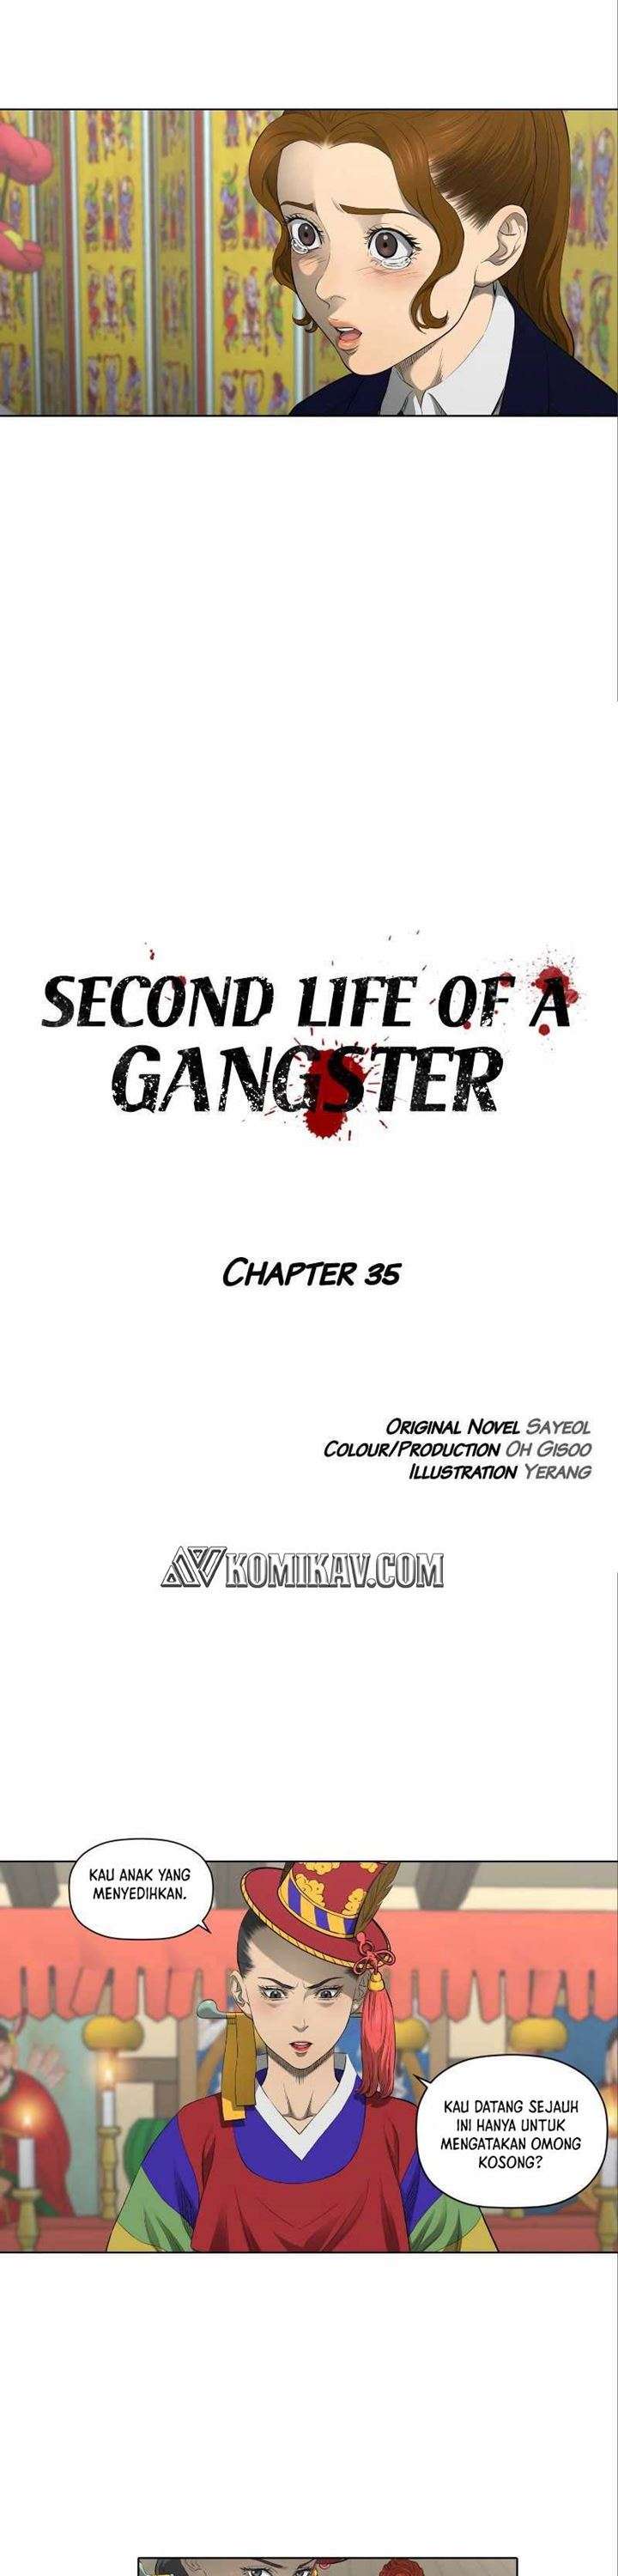 Second life of a Gangster Chapter 35